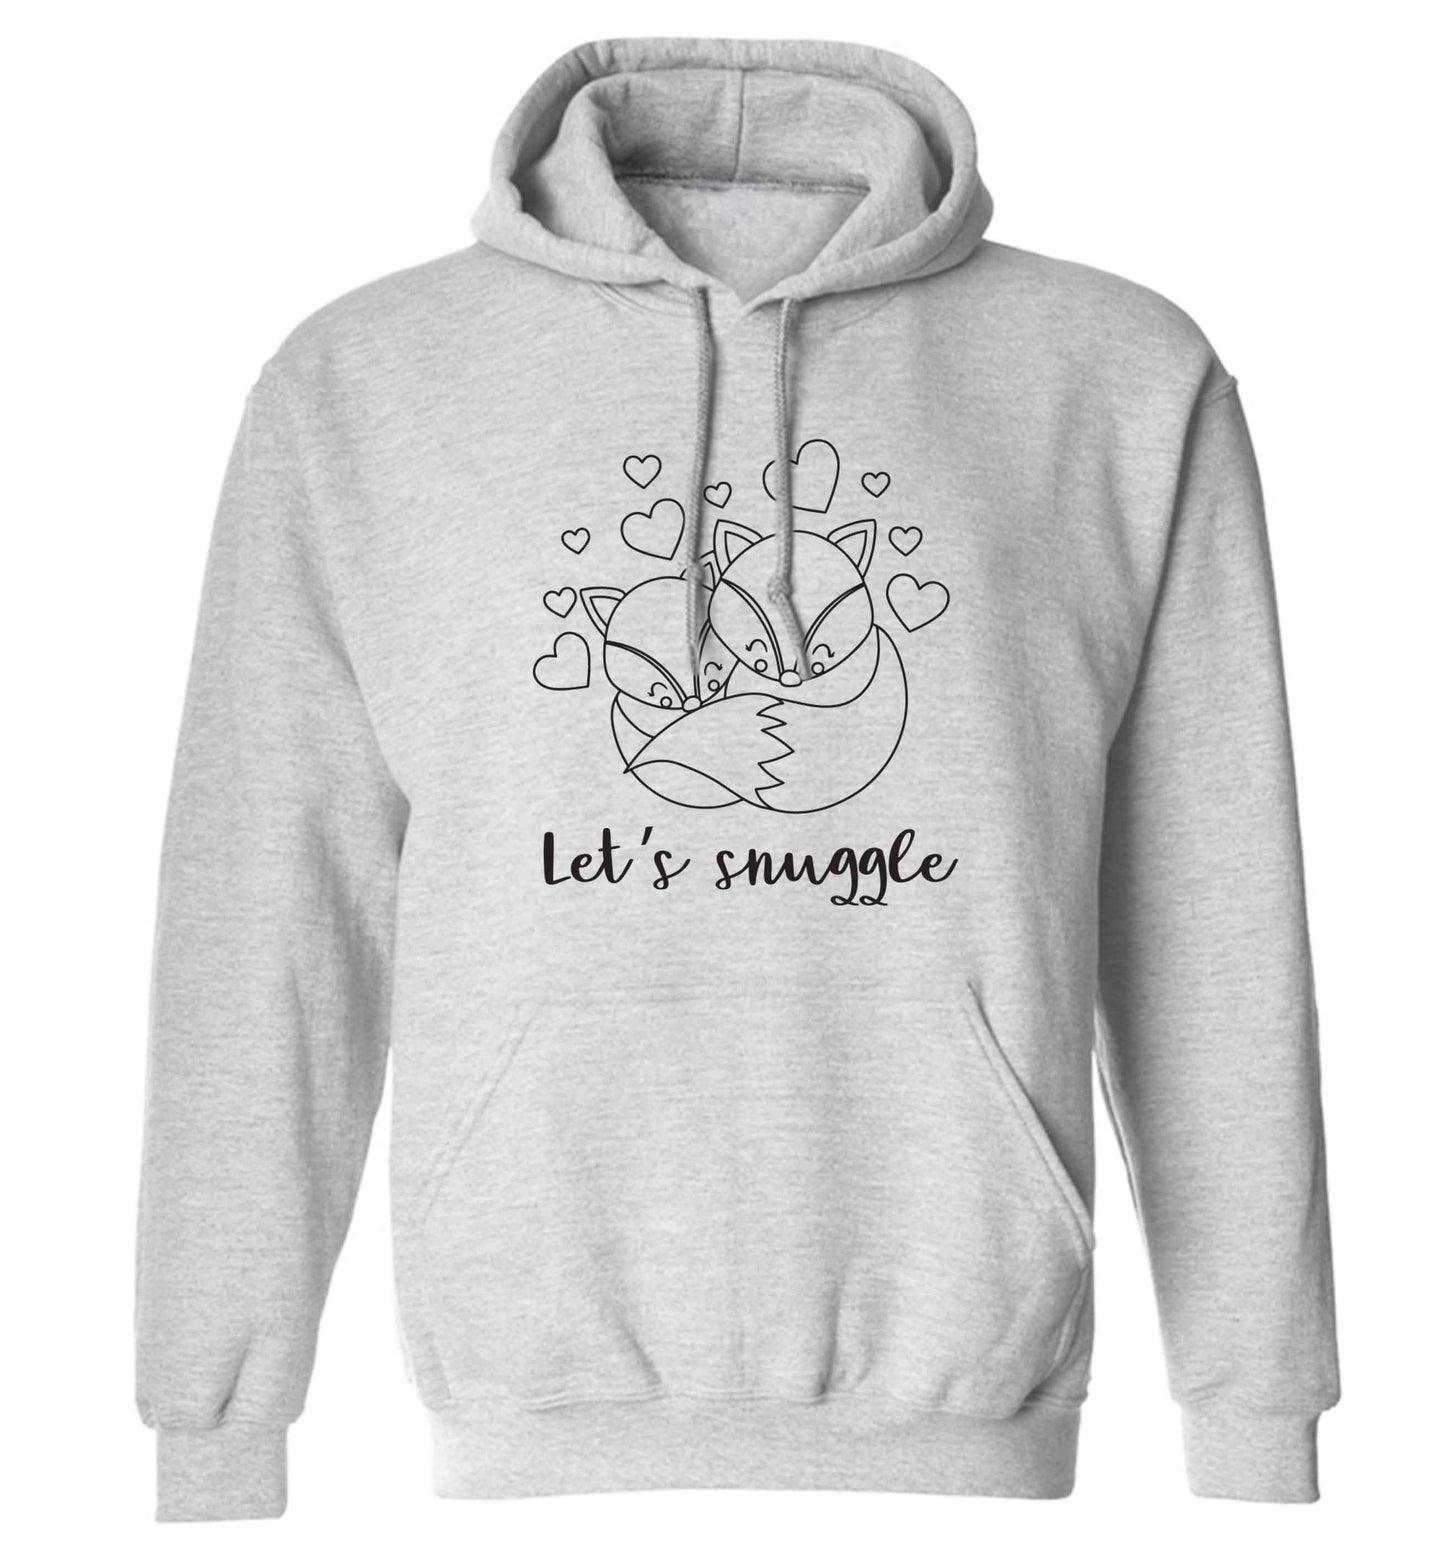 Let's snuggle adults unisex grey hoodie 2XL